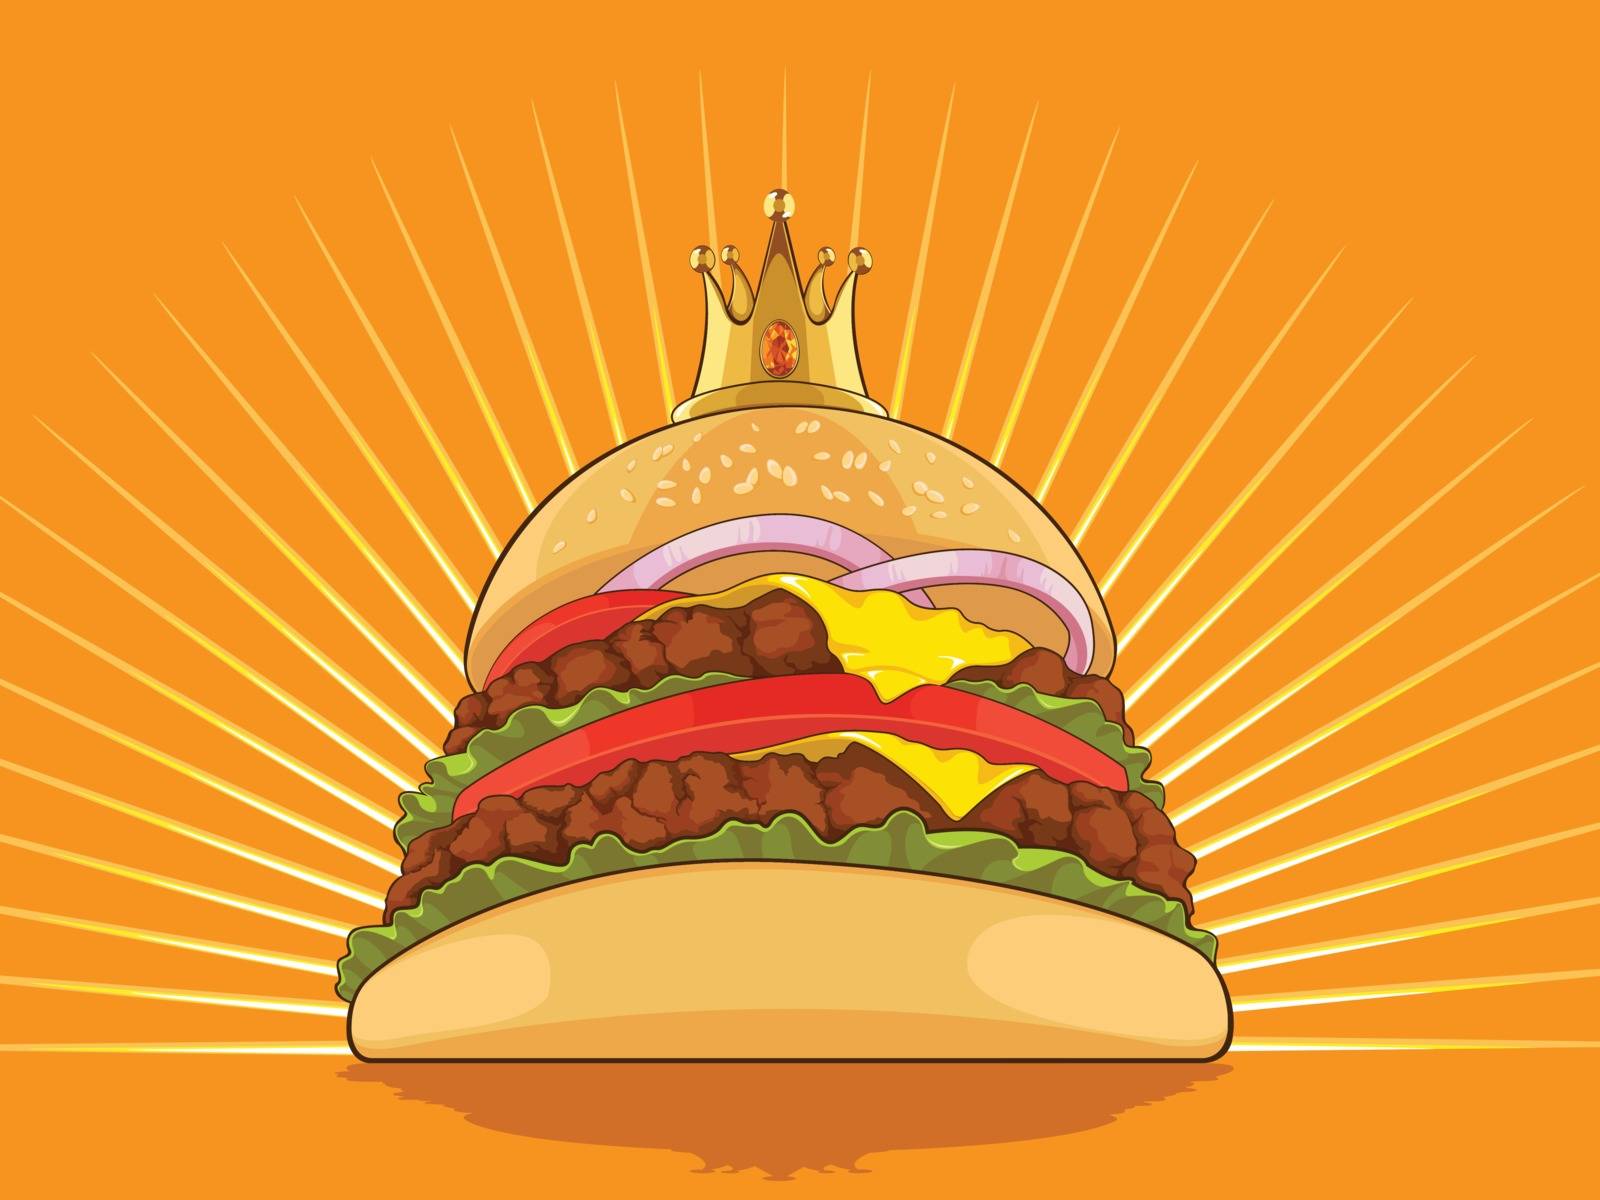 A vector image of a big burger wearing a king's golden crown. Good for food-related application, such as menu and brochure. Available as a Vector in EPS8 format that can be scaled to any size without loss of quality. Elements can be edited individually.